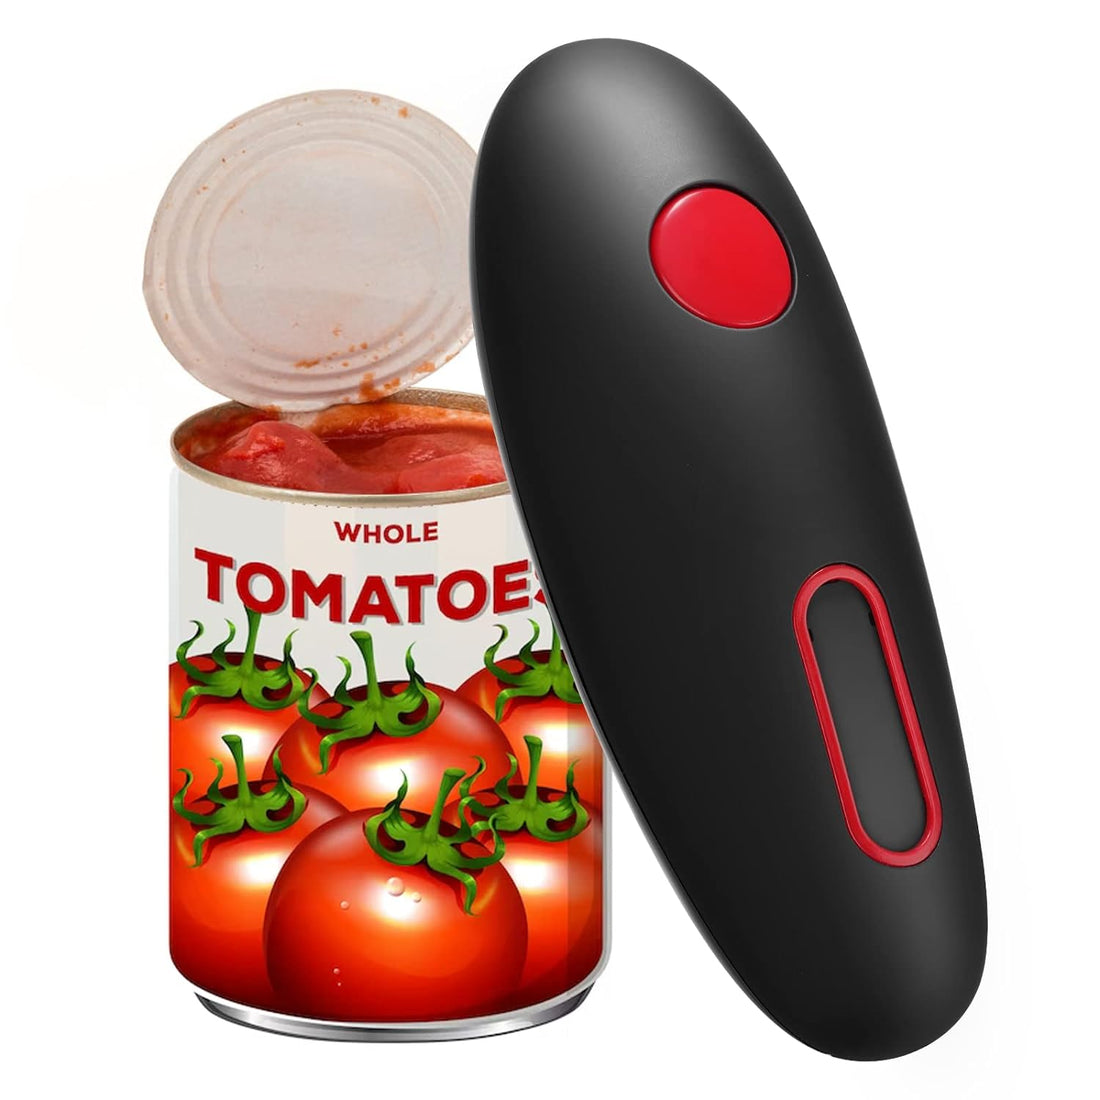 One-Touch Electric Can Opener Easy Open Any Can Sizes with Smooth Edge, Hands Free Battery Operated Electric Can Openers for Kitchen, Kitchen Gadgets Gift for Chef, Women, and Seniors with Arthritis